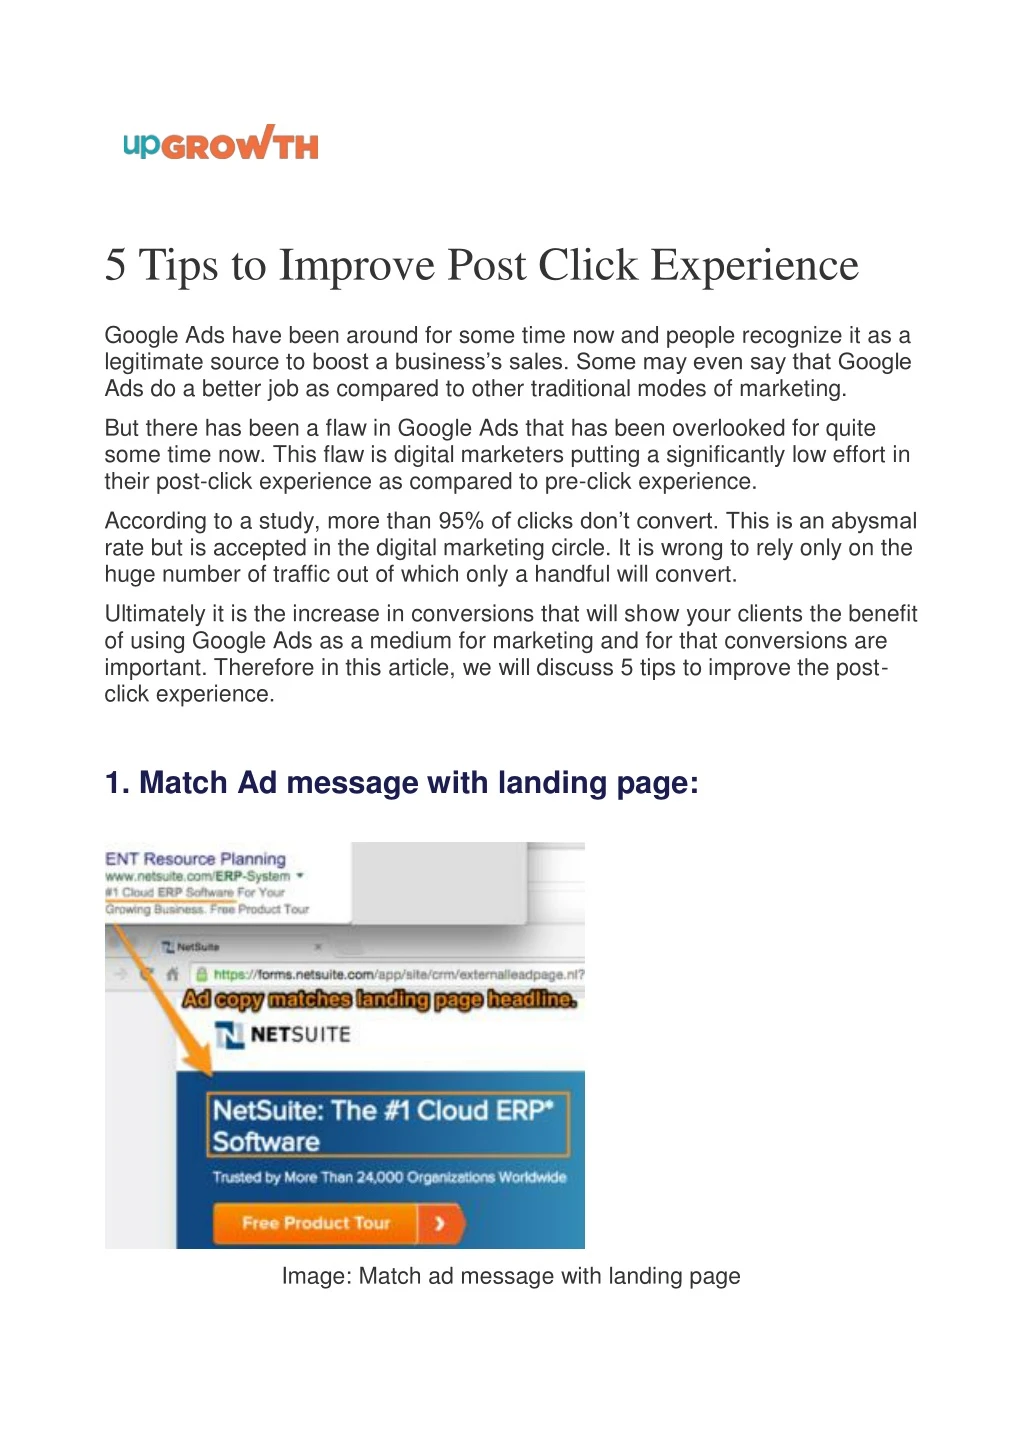 5 tips to improve post click experience